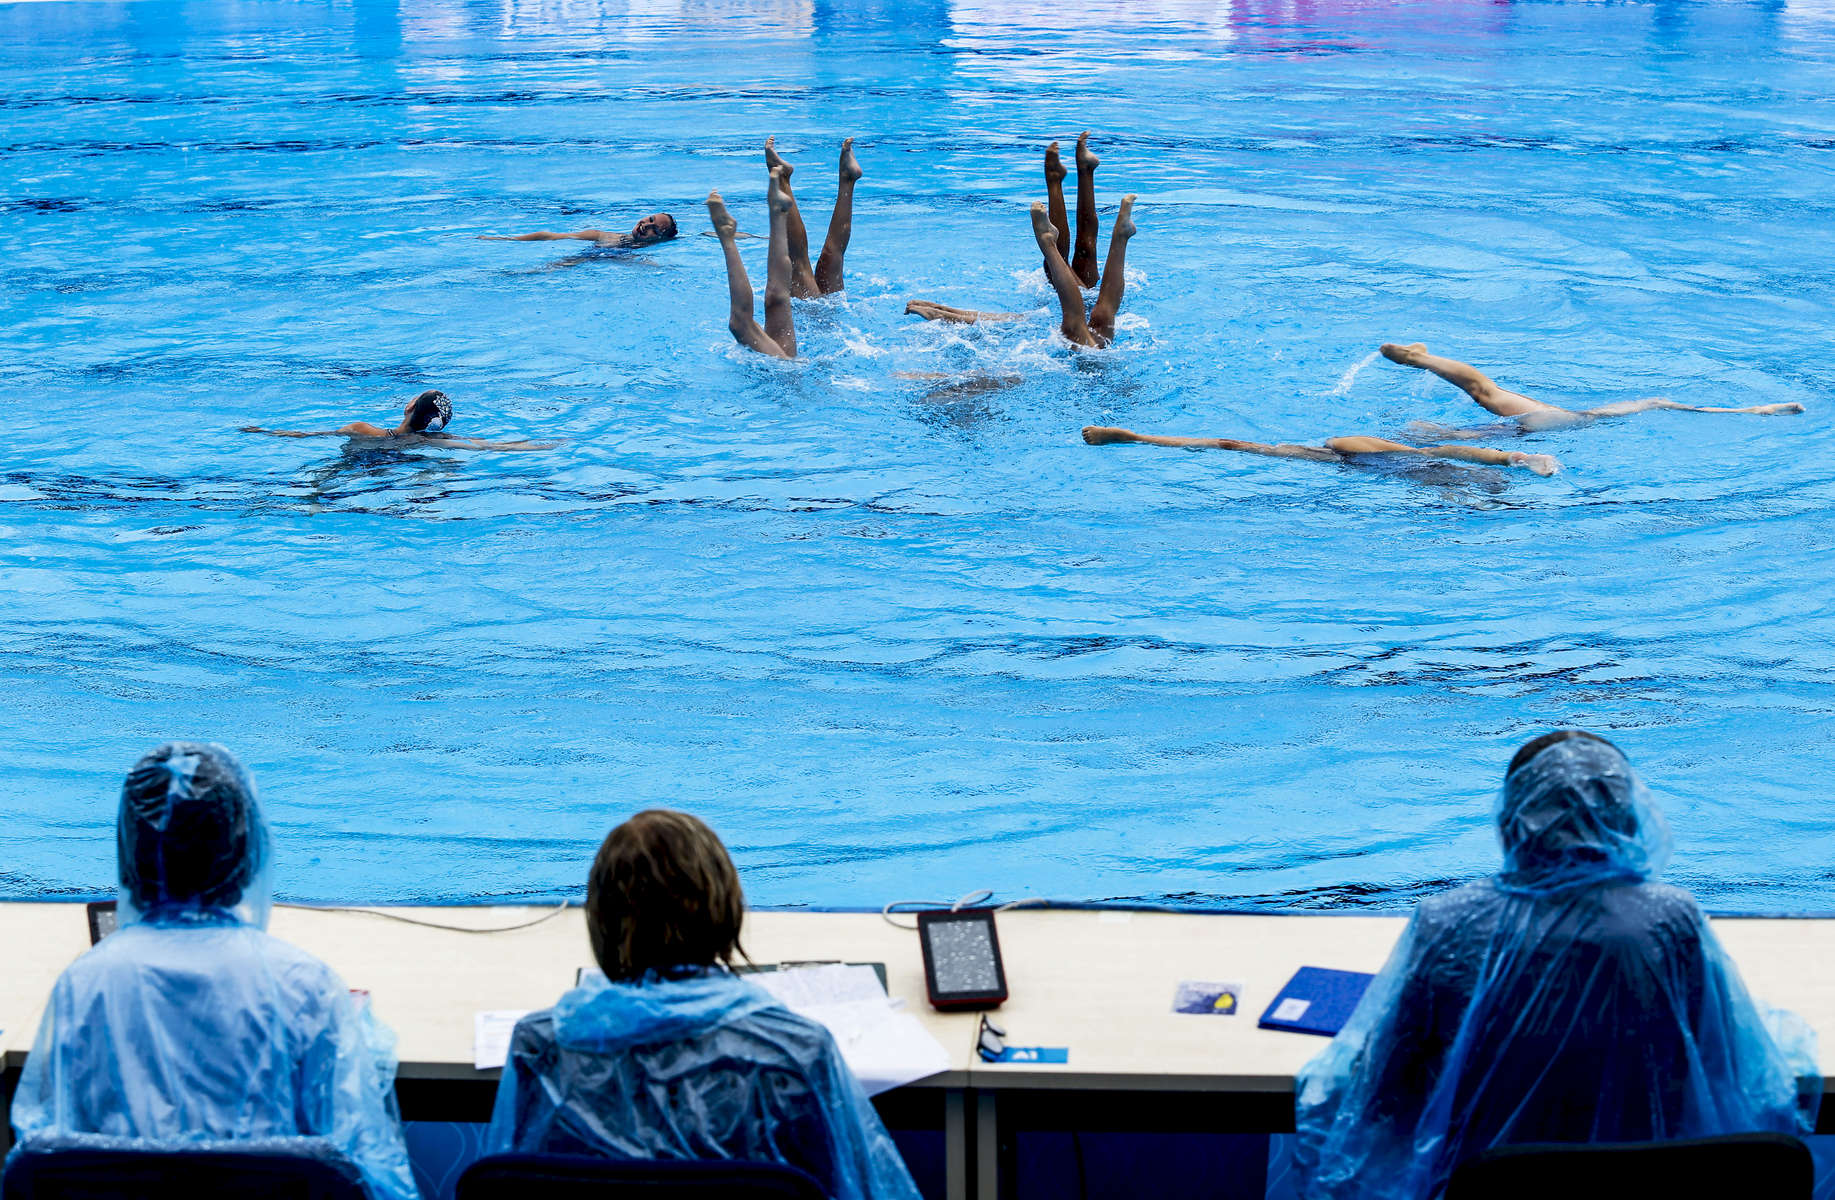 The Spanish team performs in front of the judges on a rainy morning for the Synchronised Swimming Combination Free finals, during the FINA World championships in Budapest, Hungary on July 22, 2017.